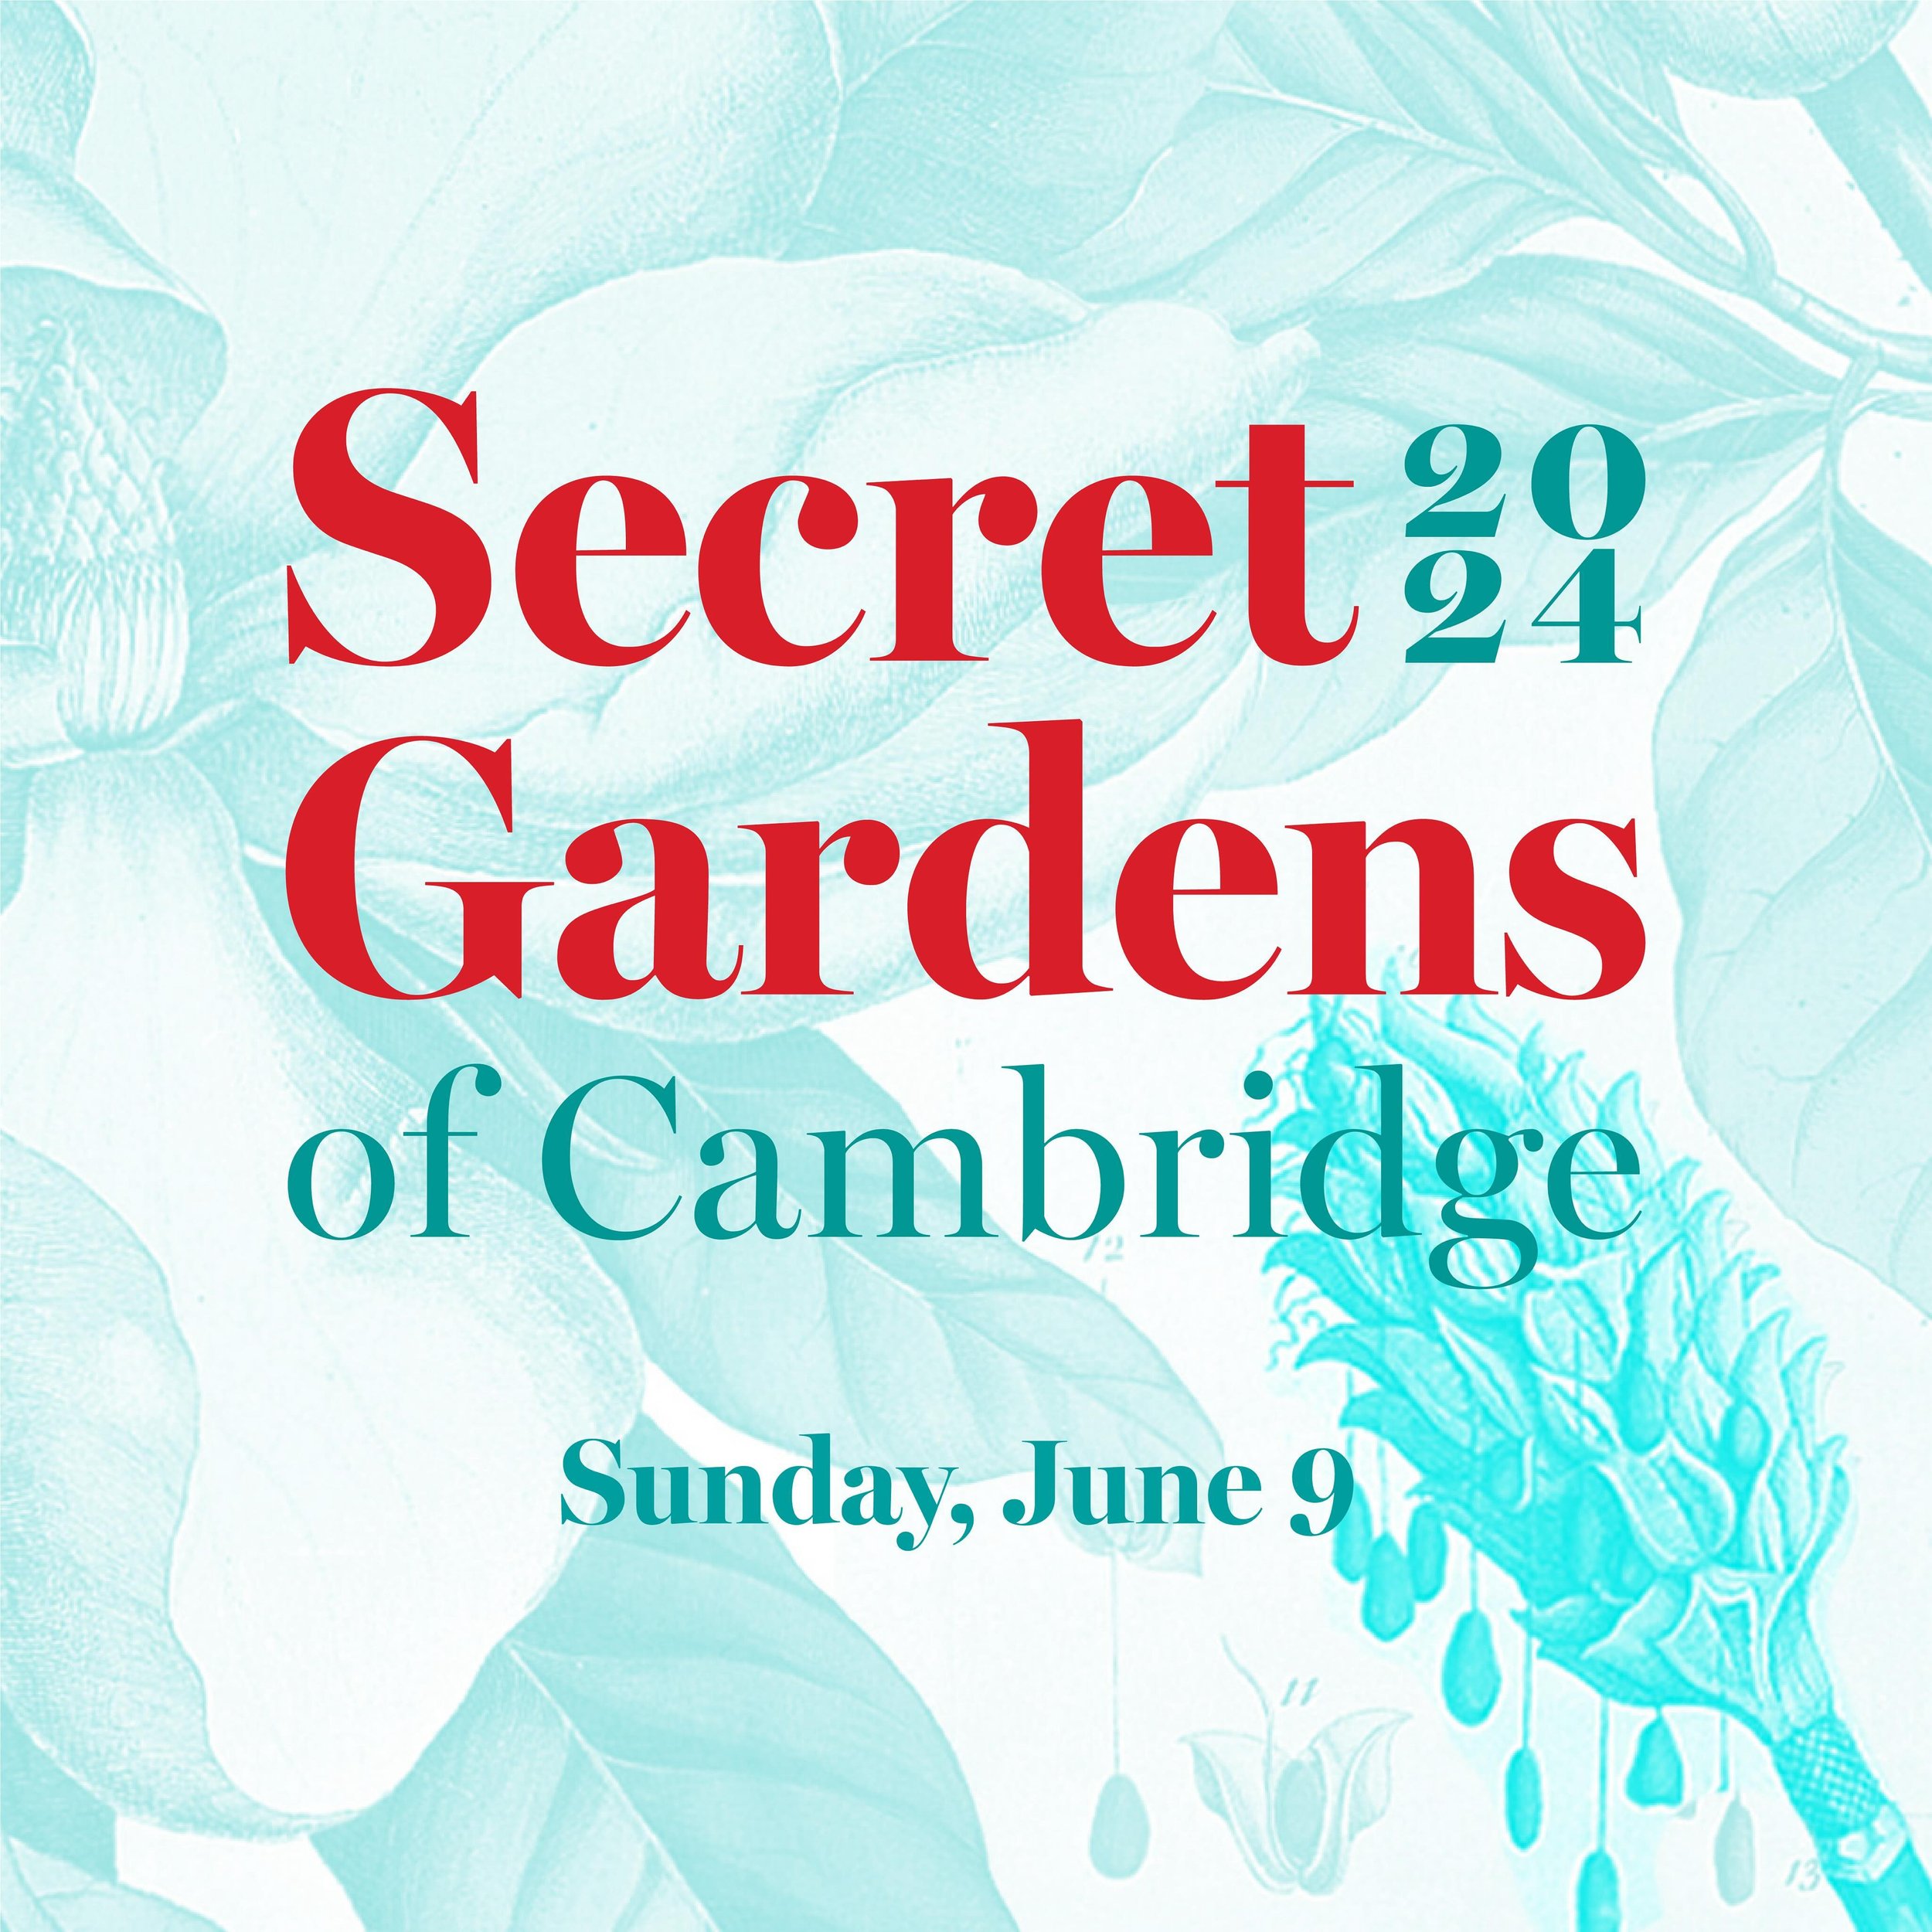 The Friends of the Cambridge Public Library are delighted to announce the 2024 Secret Gardens of Cambridge on Sunday, June 9th! Stay tuned for more details!
.
.
.
.
.
#cplfriendsofthelibrary #cambridgema #secretgardensofcambridgema #2024secretgardens